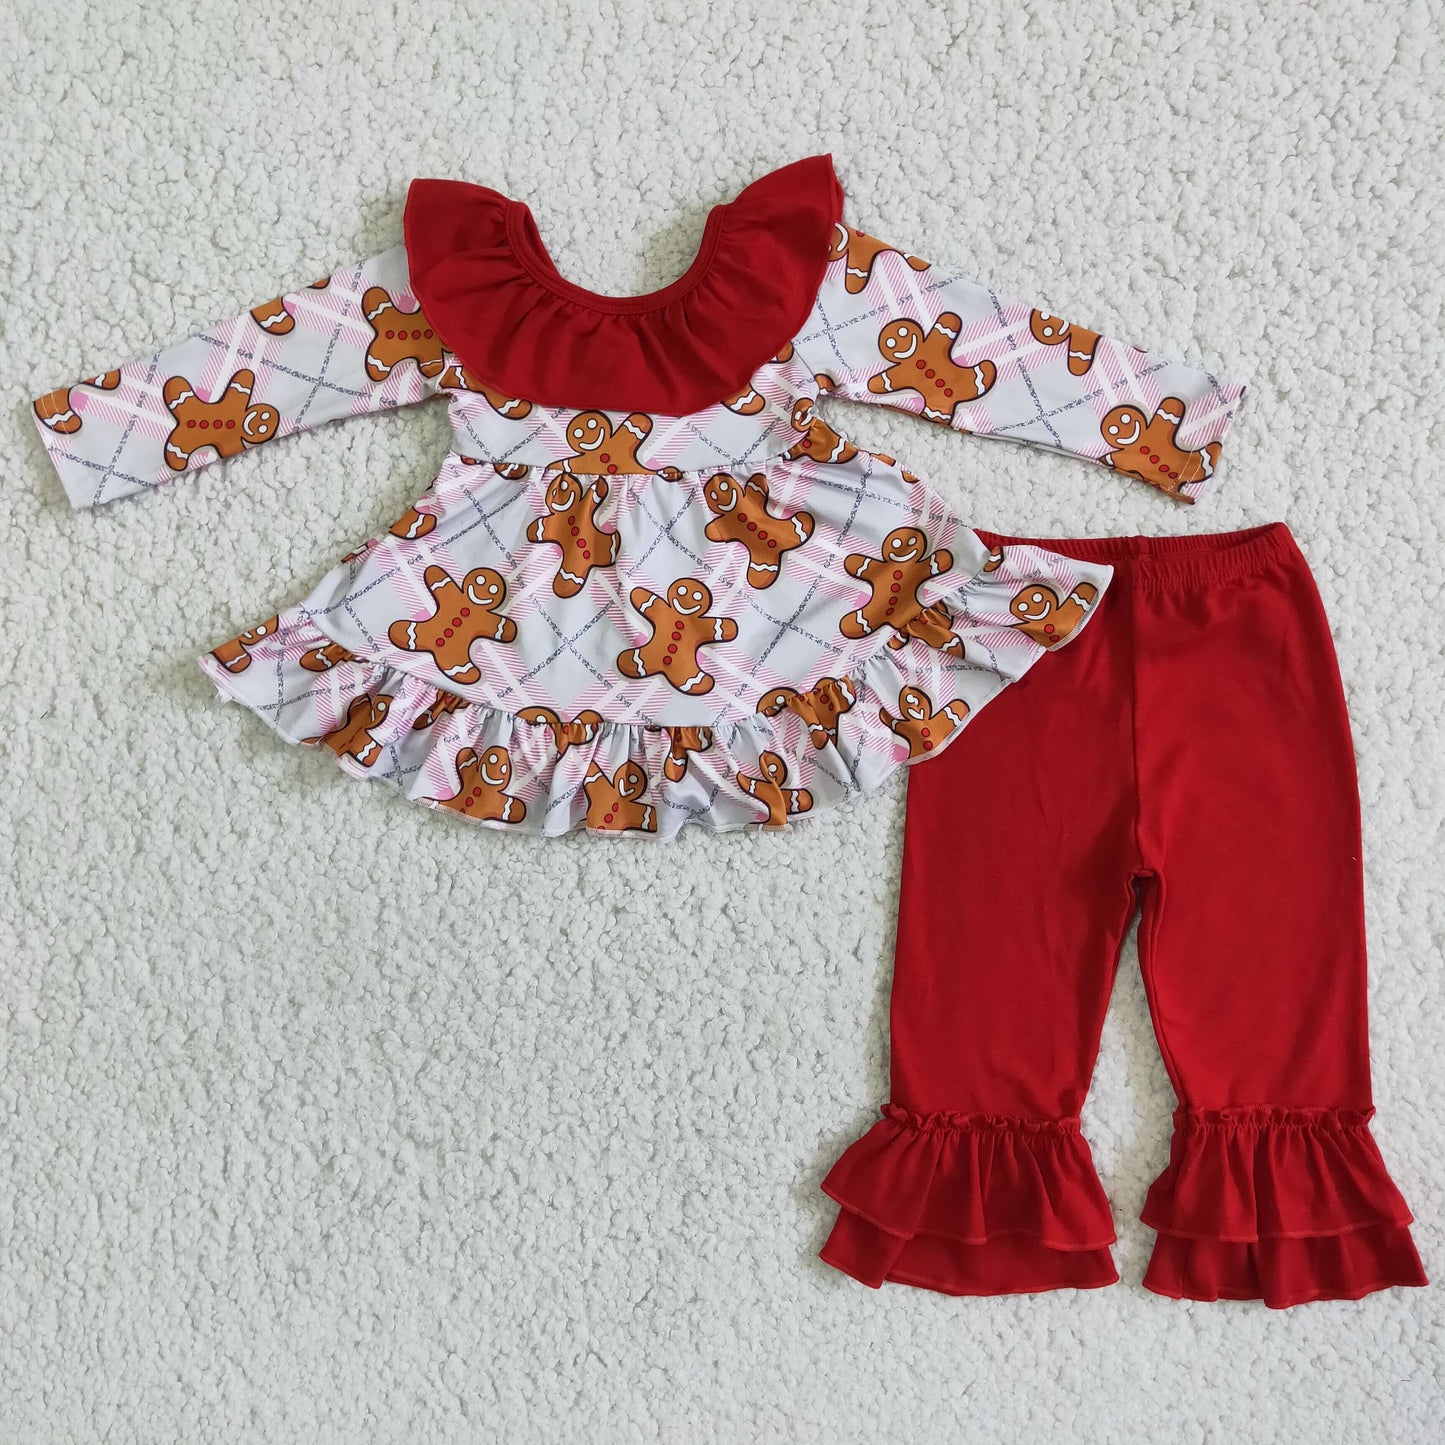 6 B8-5 Girls Outfit Gingerbread Man Print Trousers Christmas Boutique Set